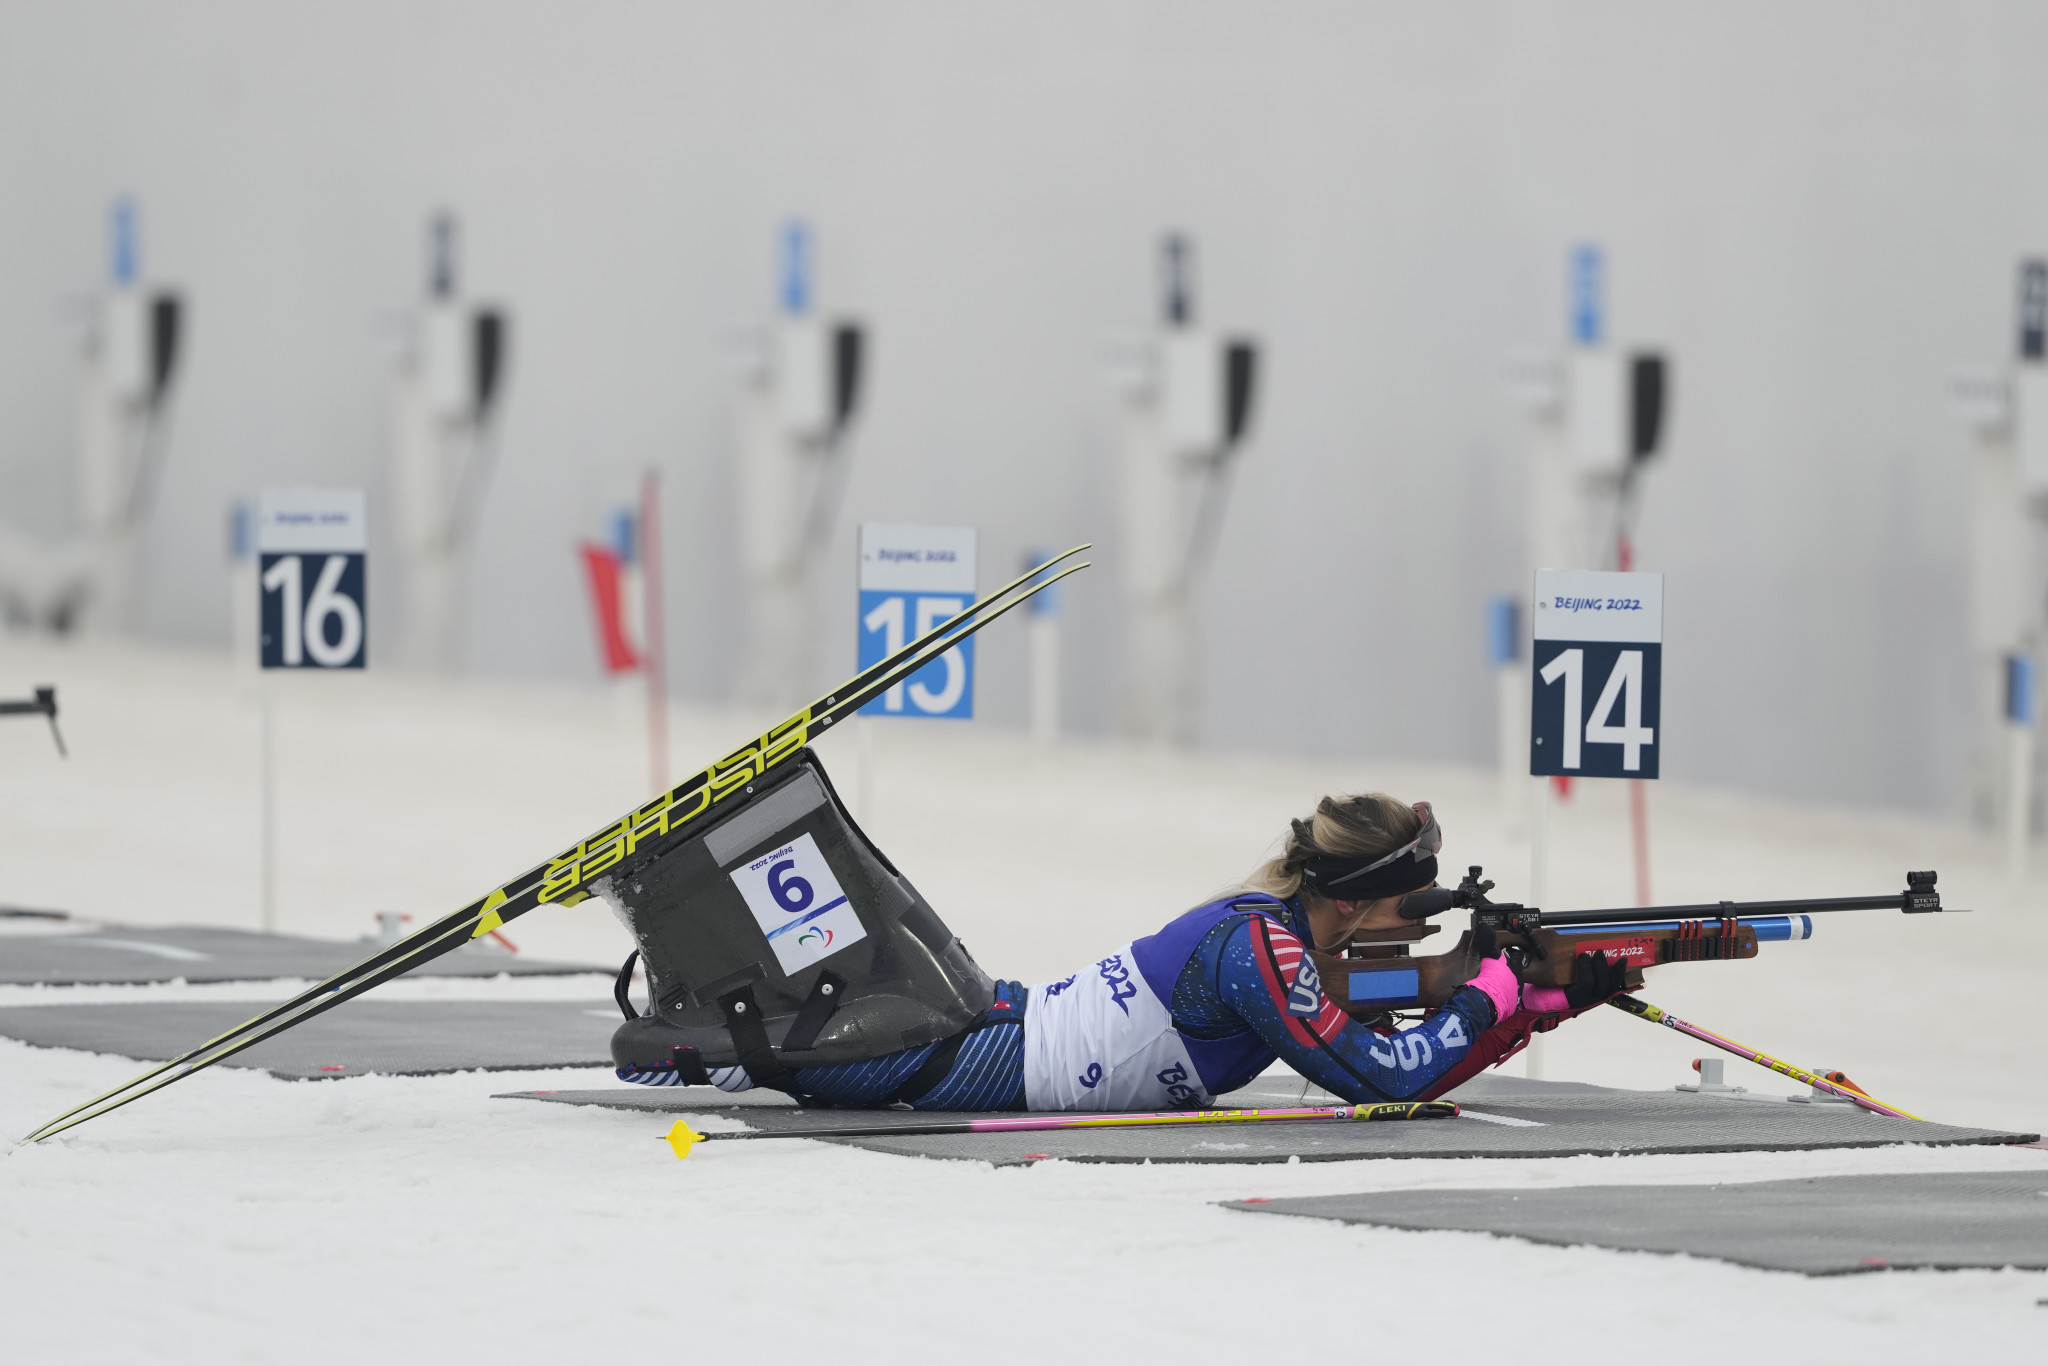 Oksana Masters won gold in the women's individual sitting biathlon event at Beijing 2022 ©Getty Images